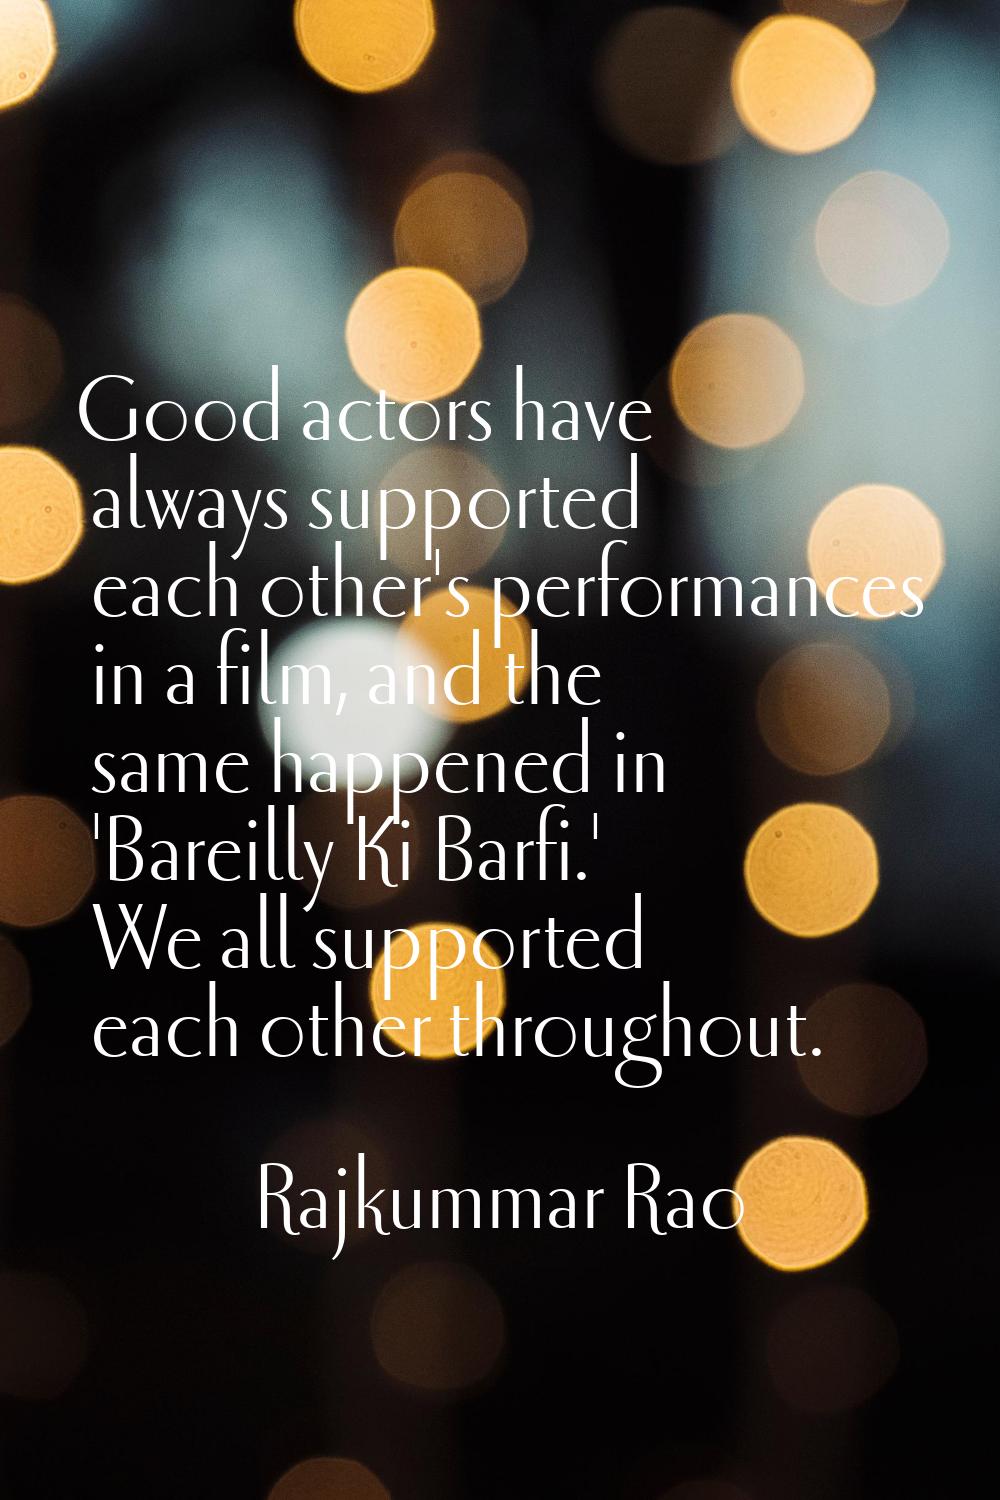 Good actors have always supported each other's performances in a film, and the same happened in 'Ba